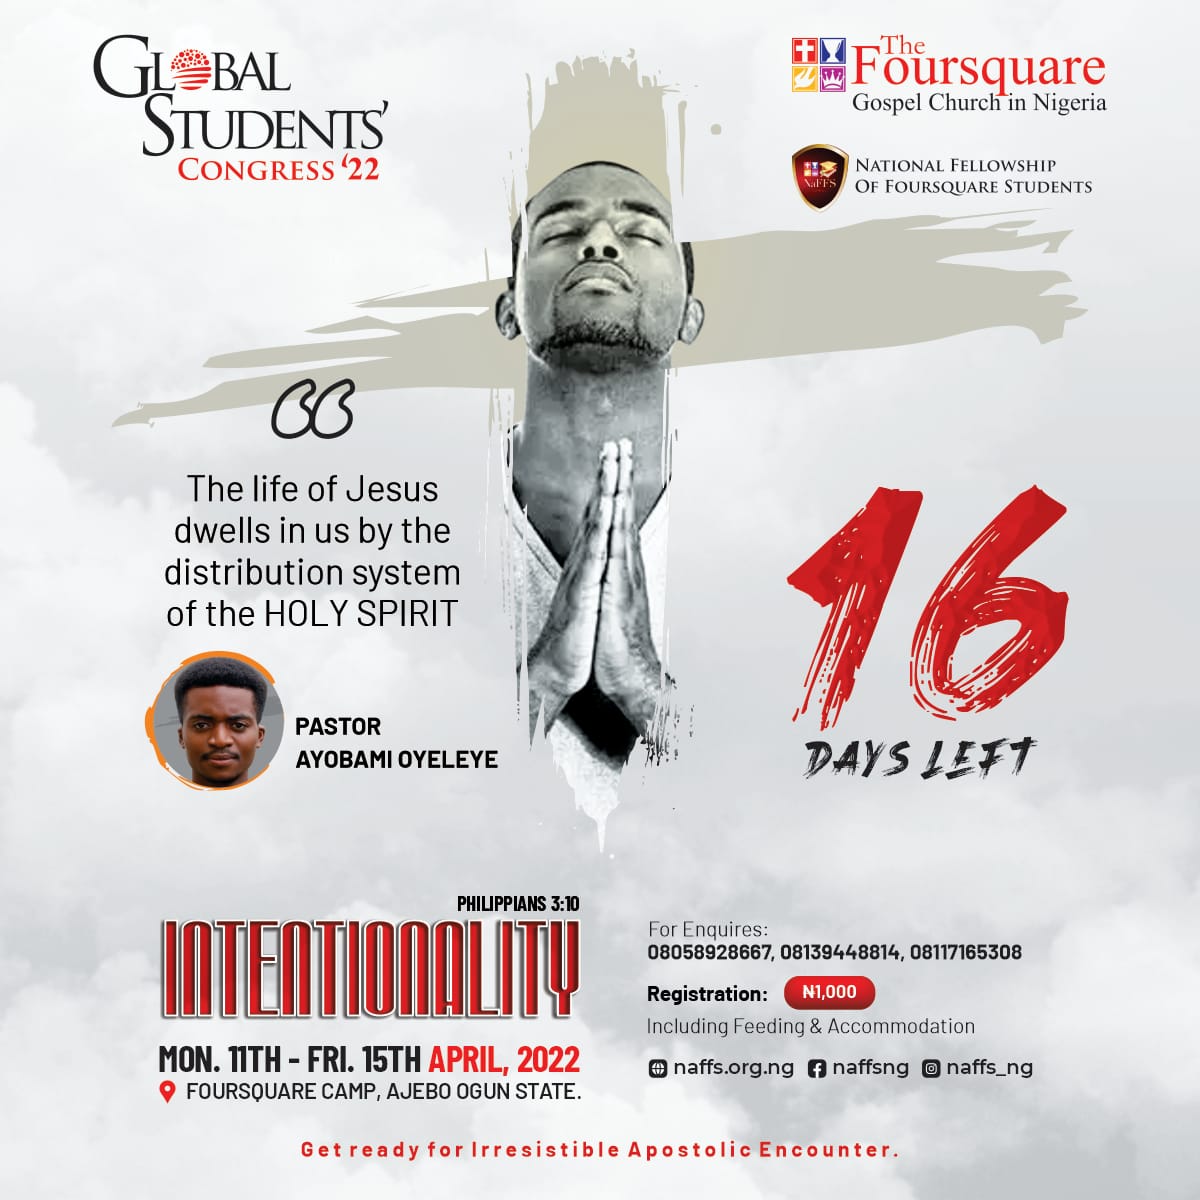 It is 16 days to GSC '22! 🔥 Join us from Monday, 11th - Friday, 15th April, 2022 at Foursquare Camp, Ajebo as we fellowship together! Registration covers feeding and accommodation. Register via naffs.org.ng We are prepared to have you! #GSC2022 #Intentionality